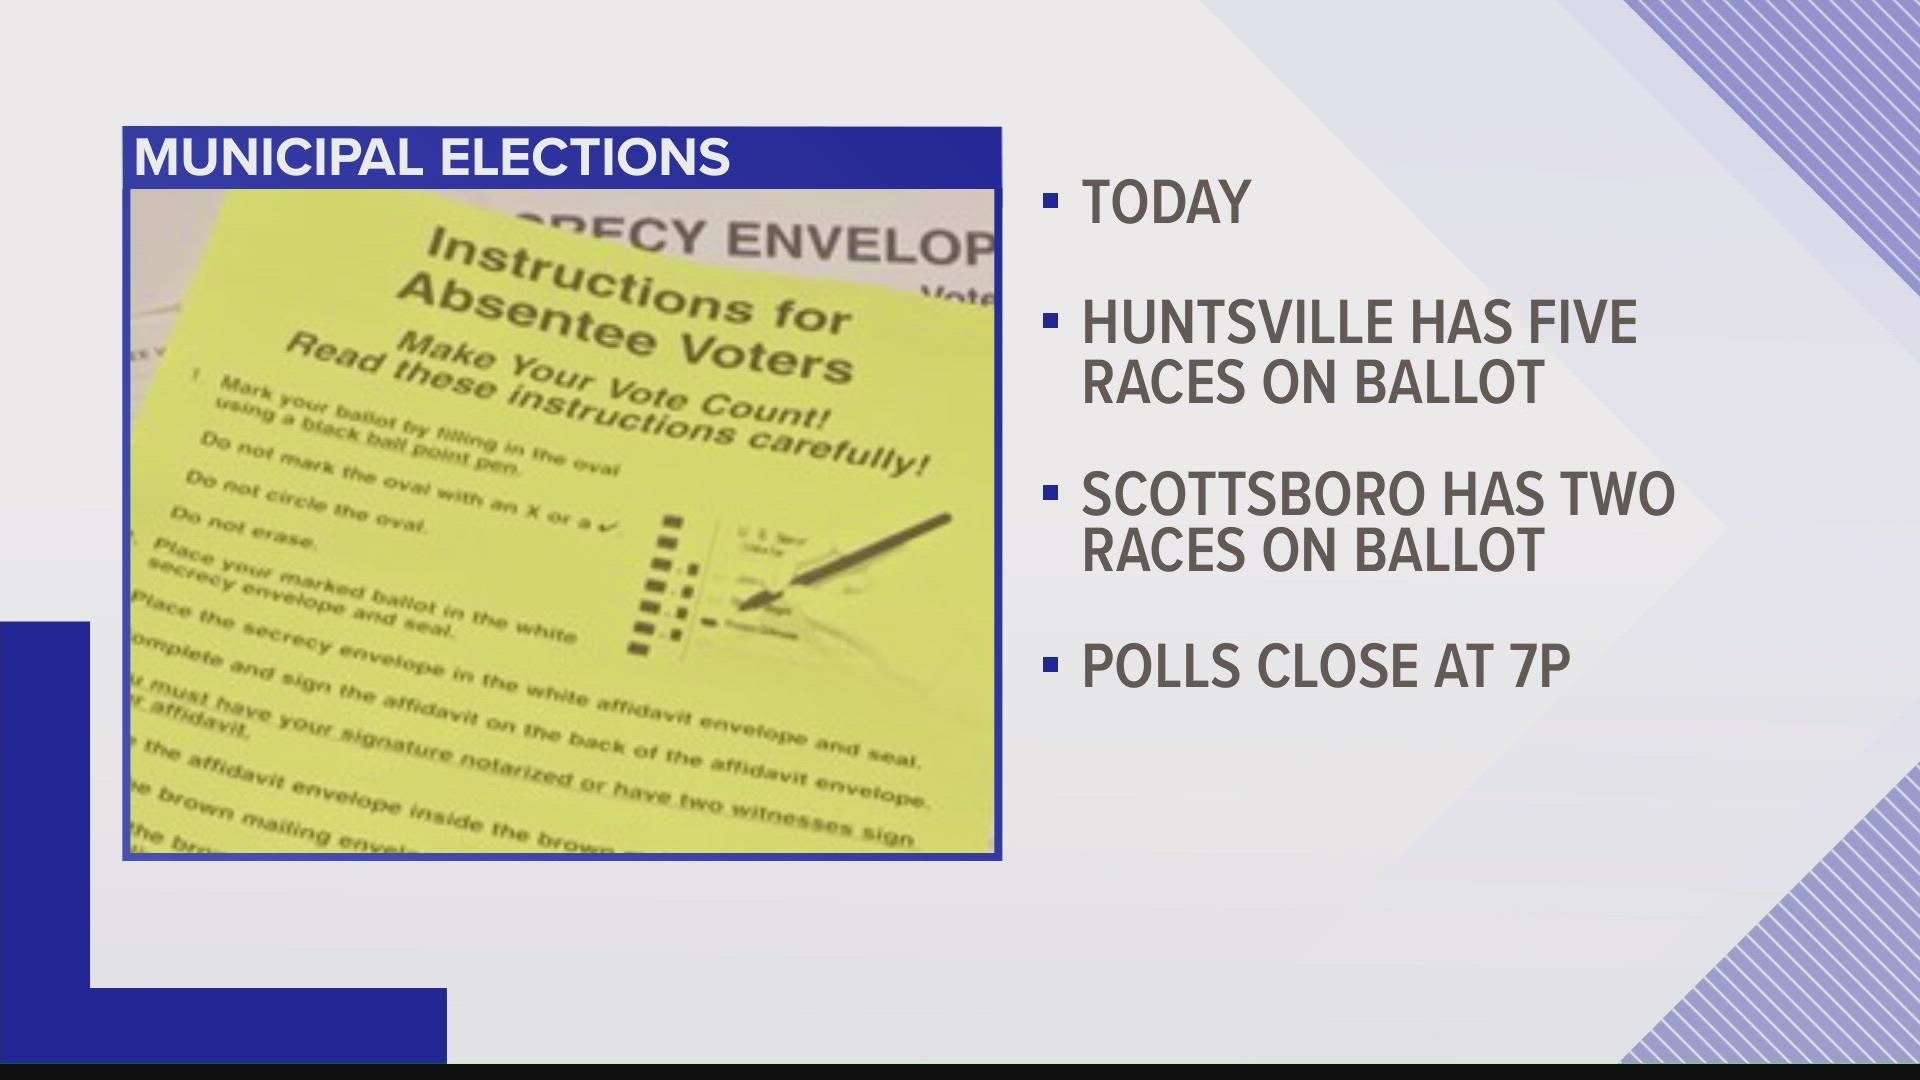 Five races are on the ballot in Huntsville. Two Huntsville City Council races, and three Huntsville Board of Education races.